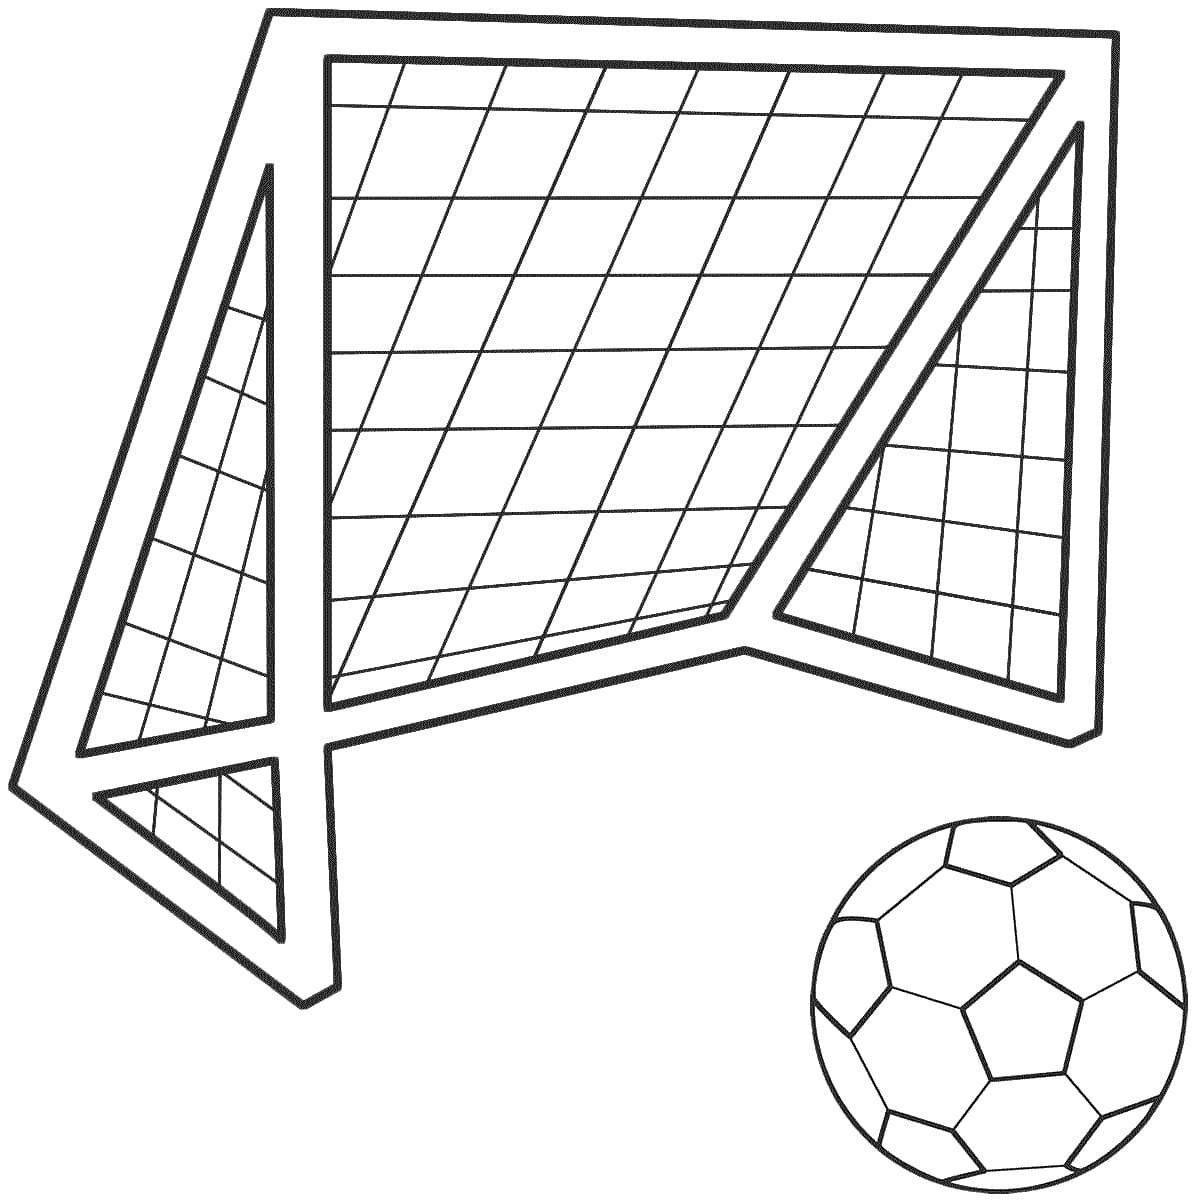 Coloring book playful soccer ball